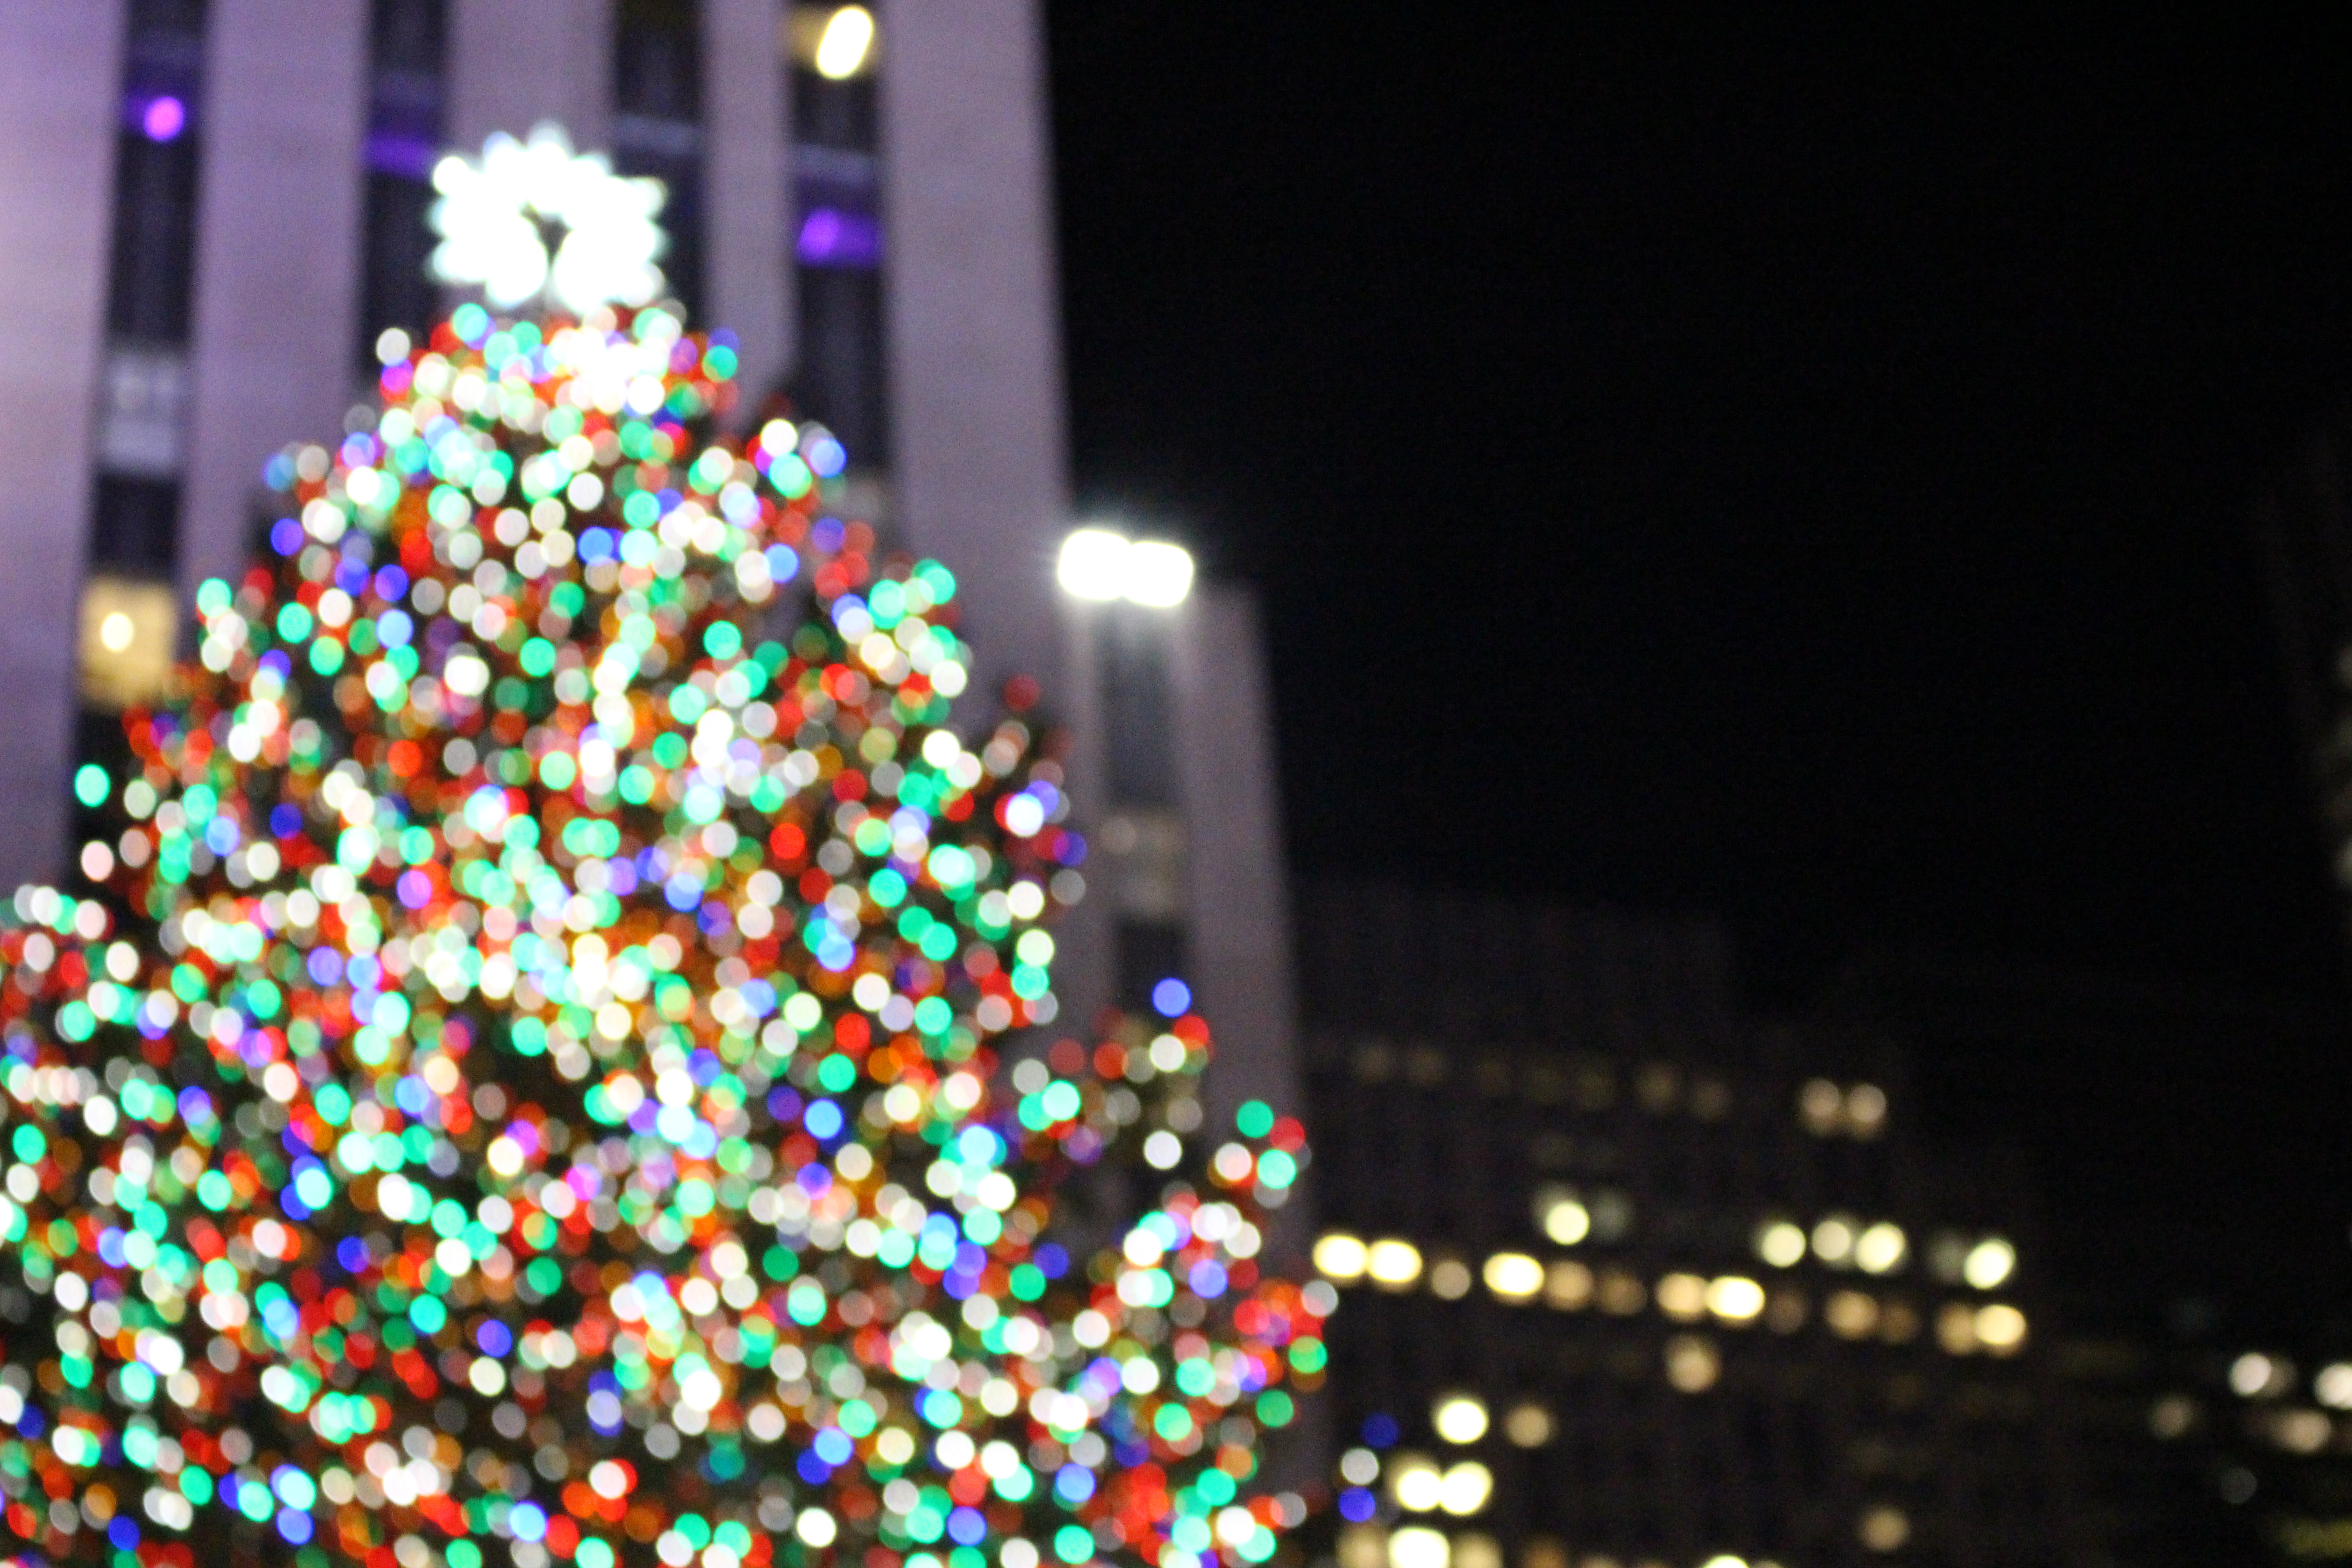 An out of focus Christmas tree